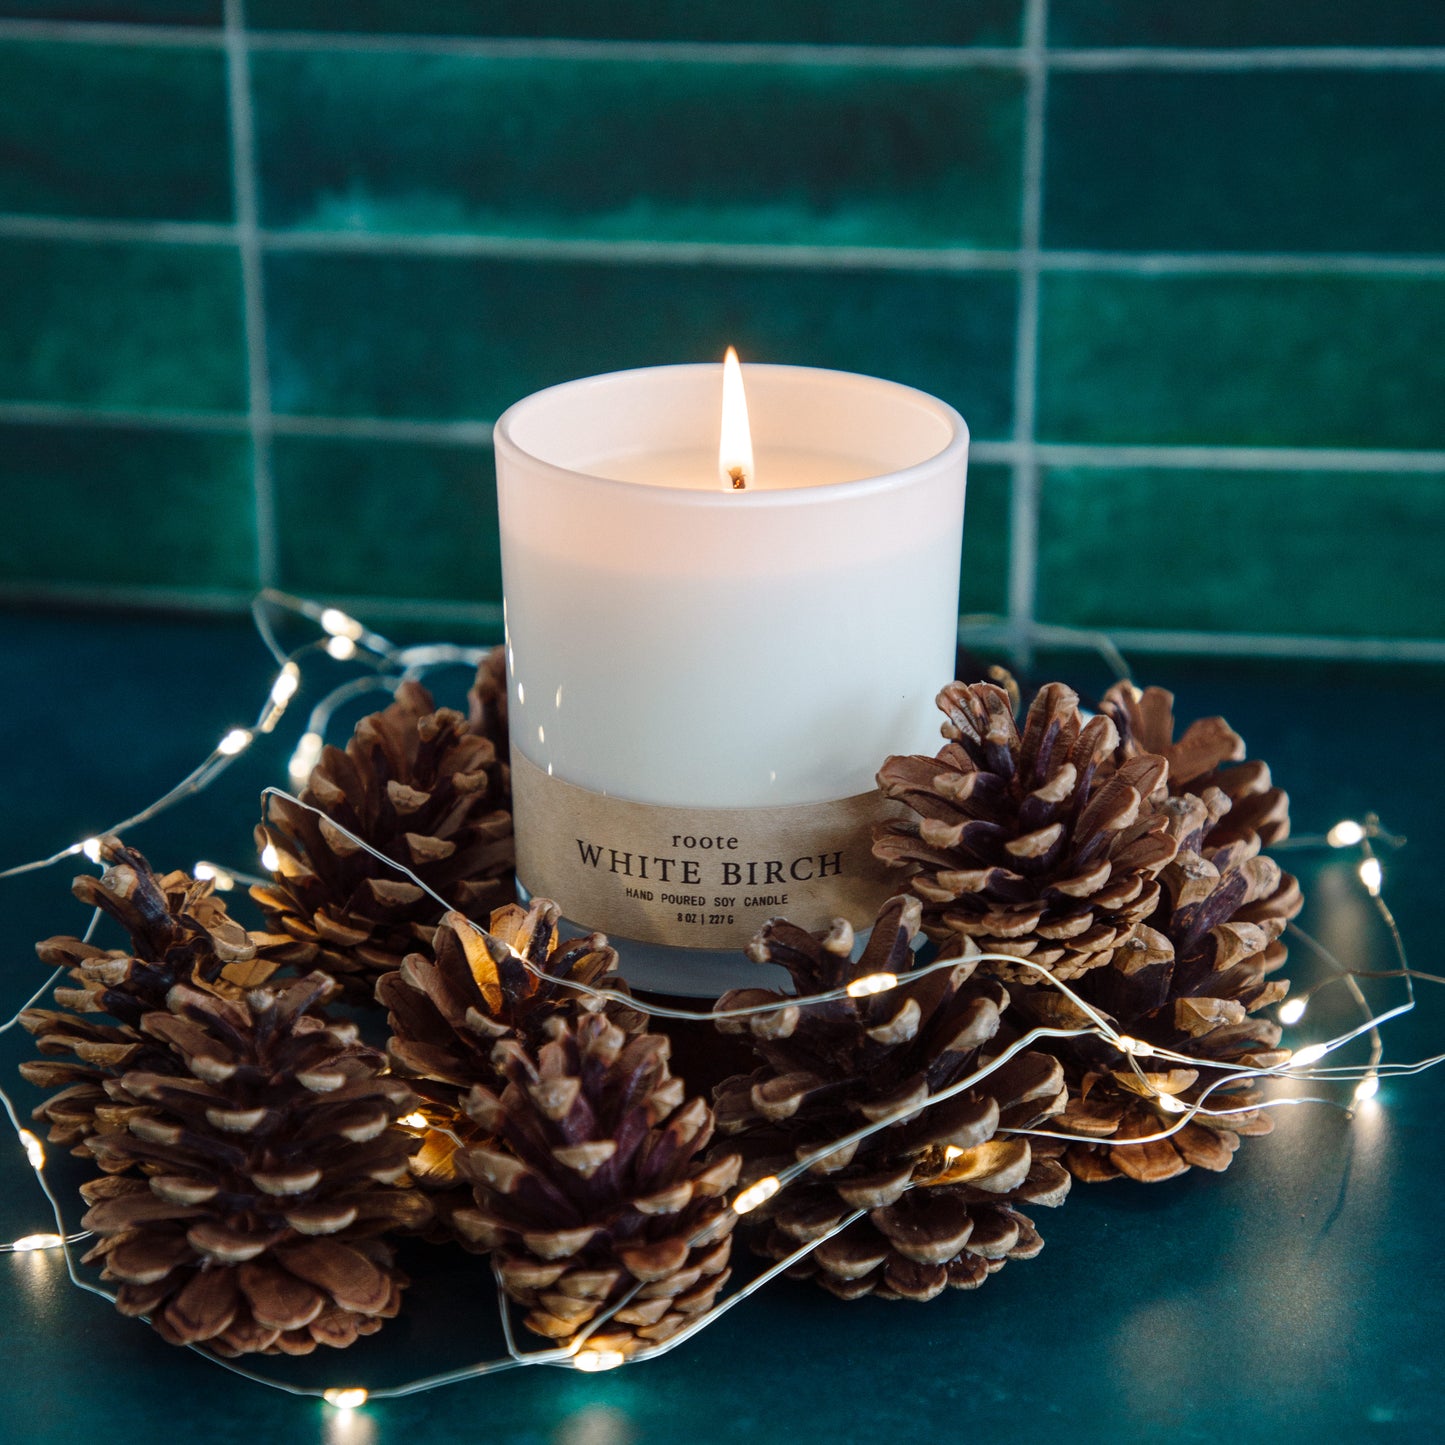 Apothecary Collection Holiday - White Birch